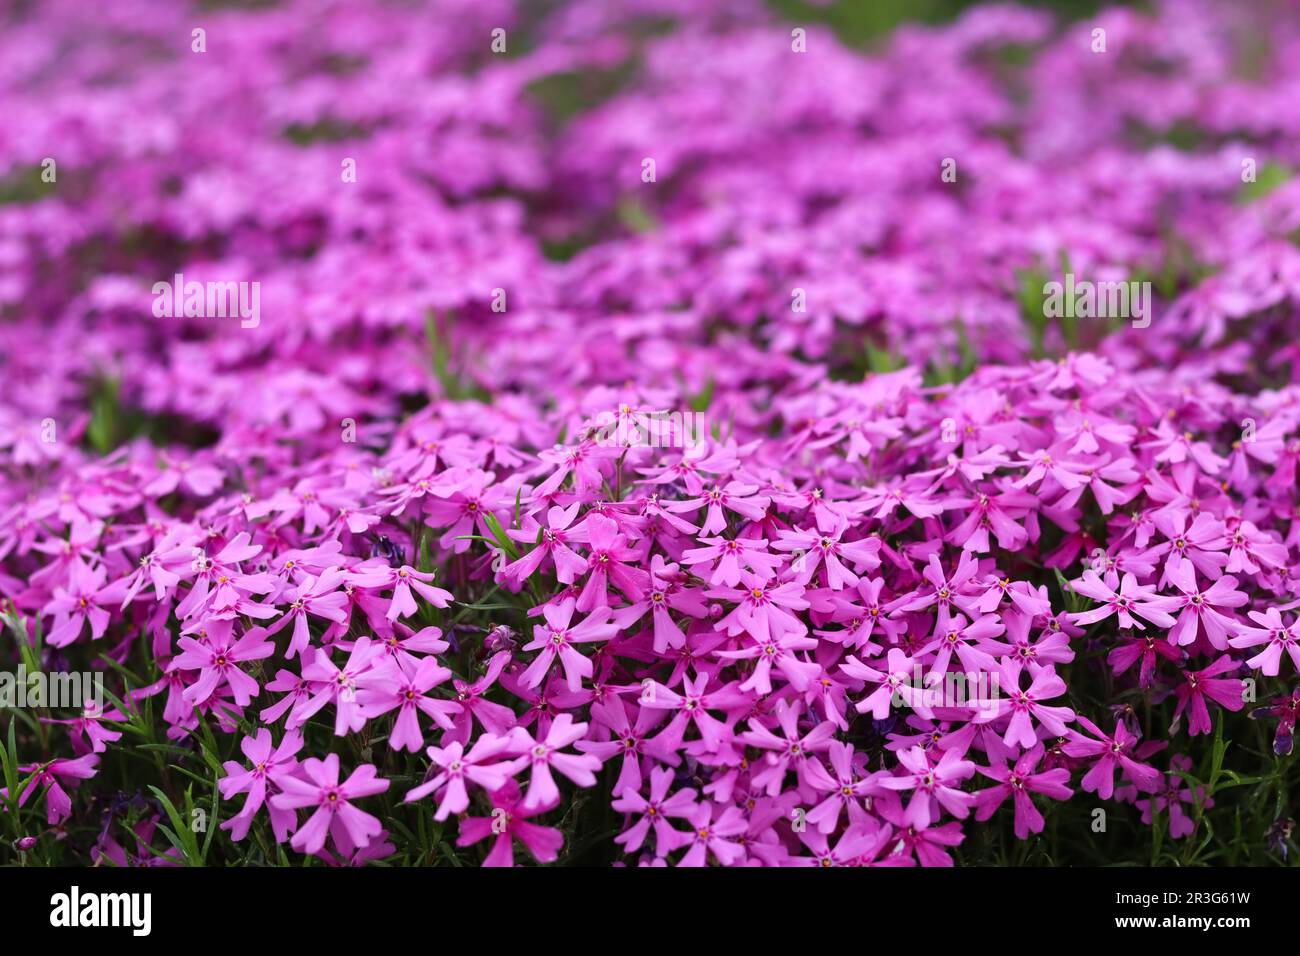 Background of purple flowers Phlox in spring Stock Photo